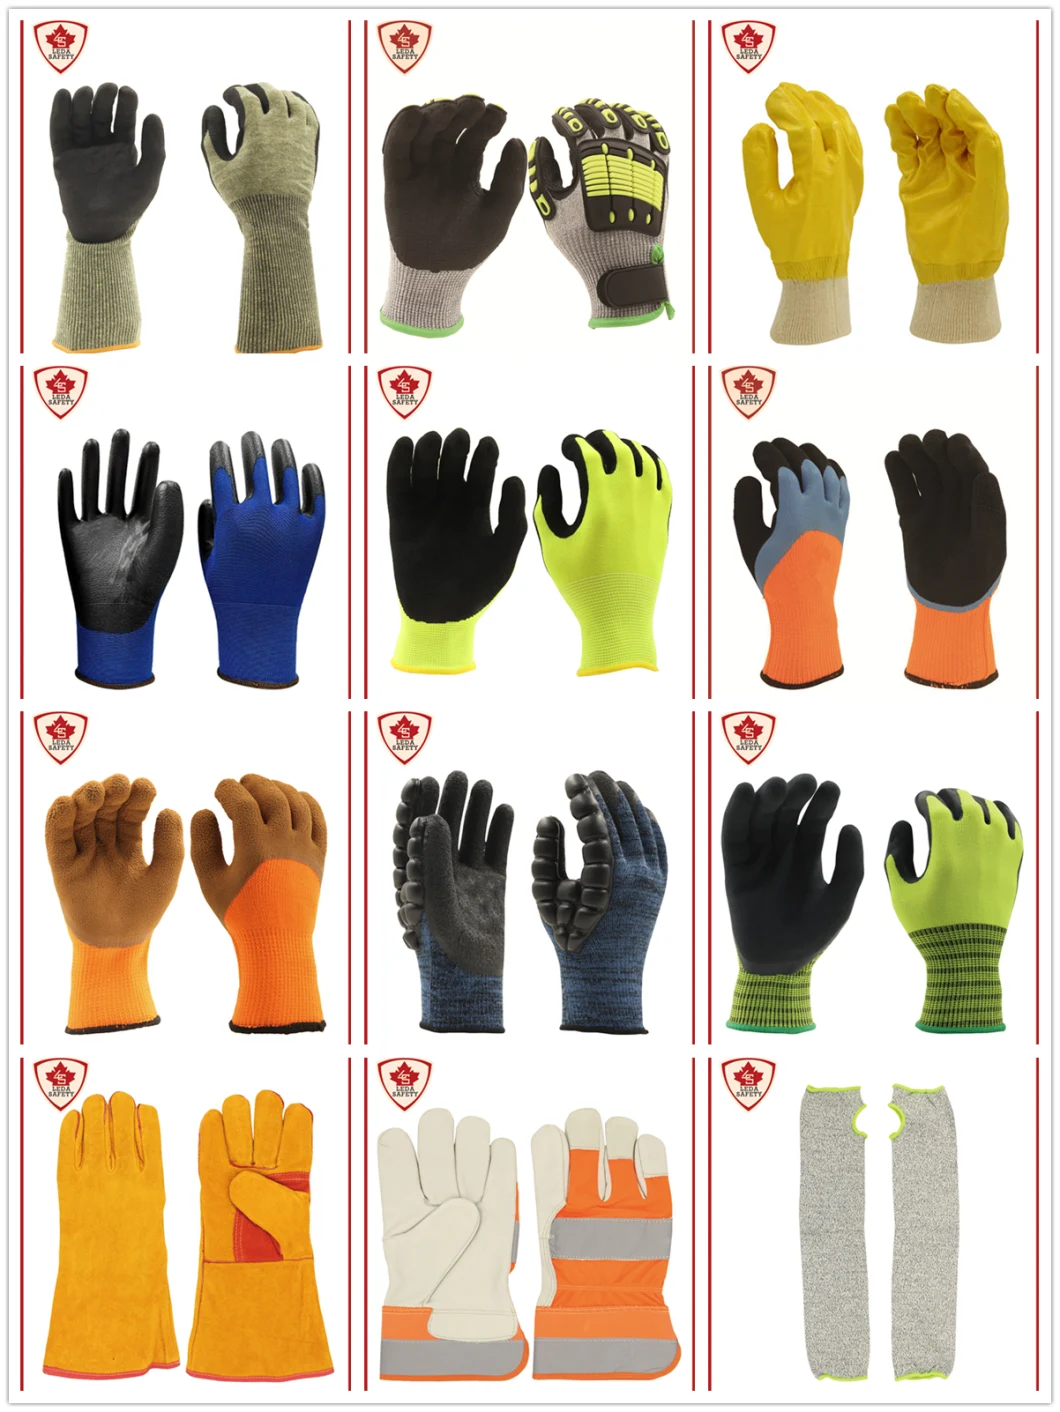 Gardening Work Use Hand Protecting Cut Resistant Level C Work Gloves